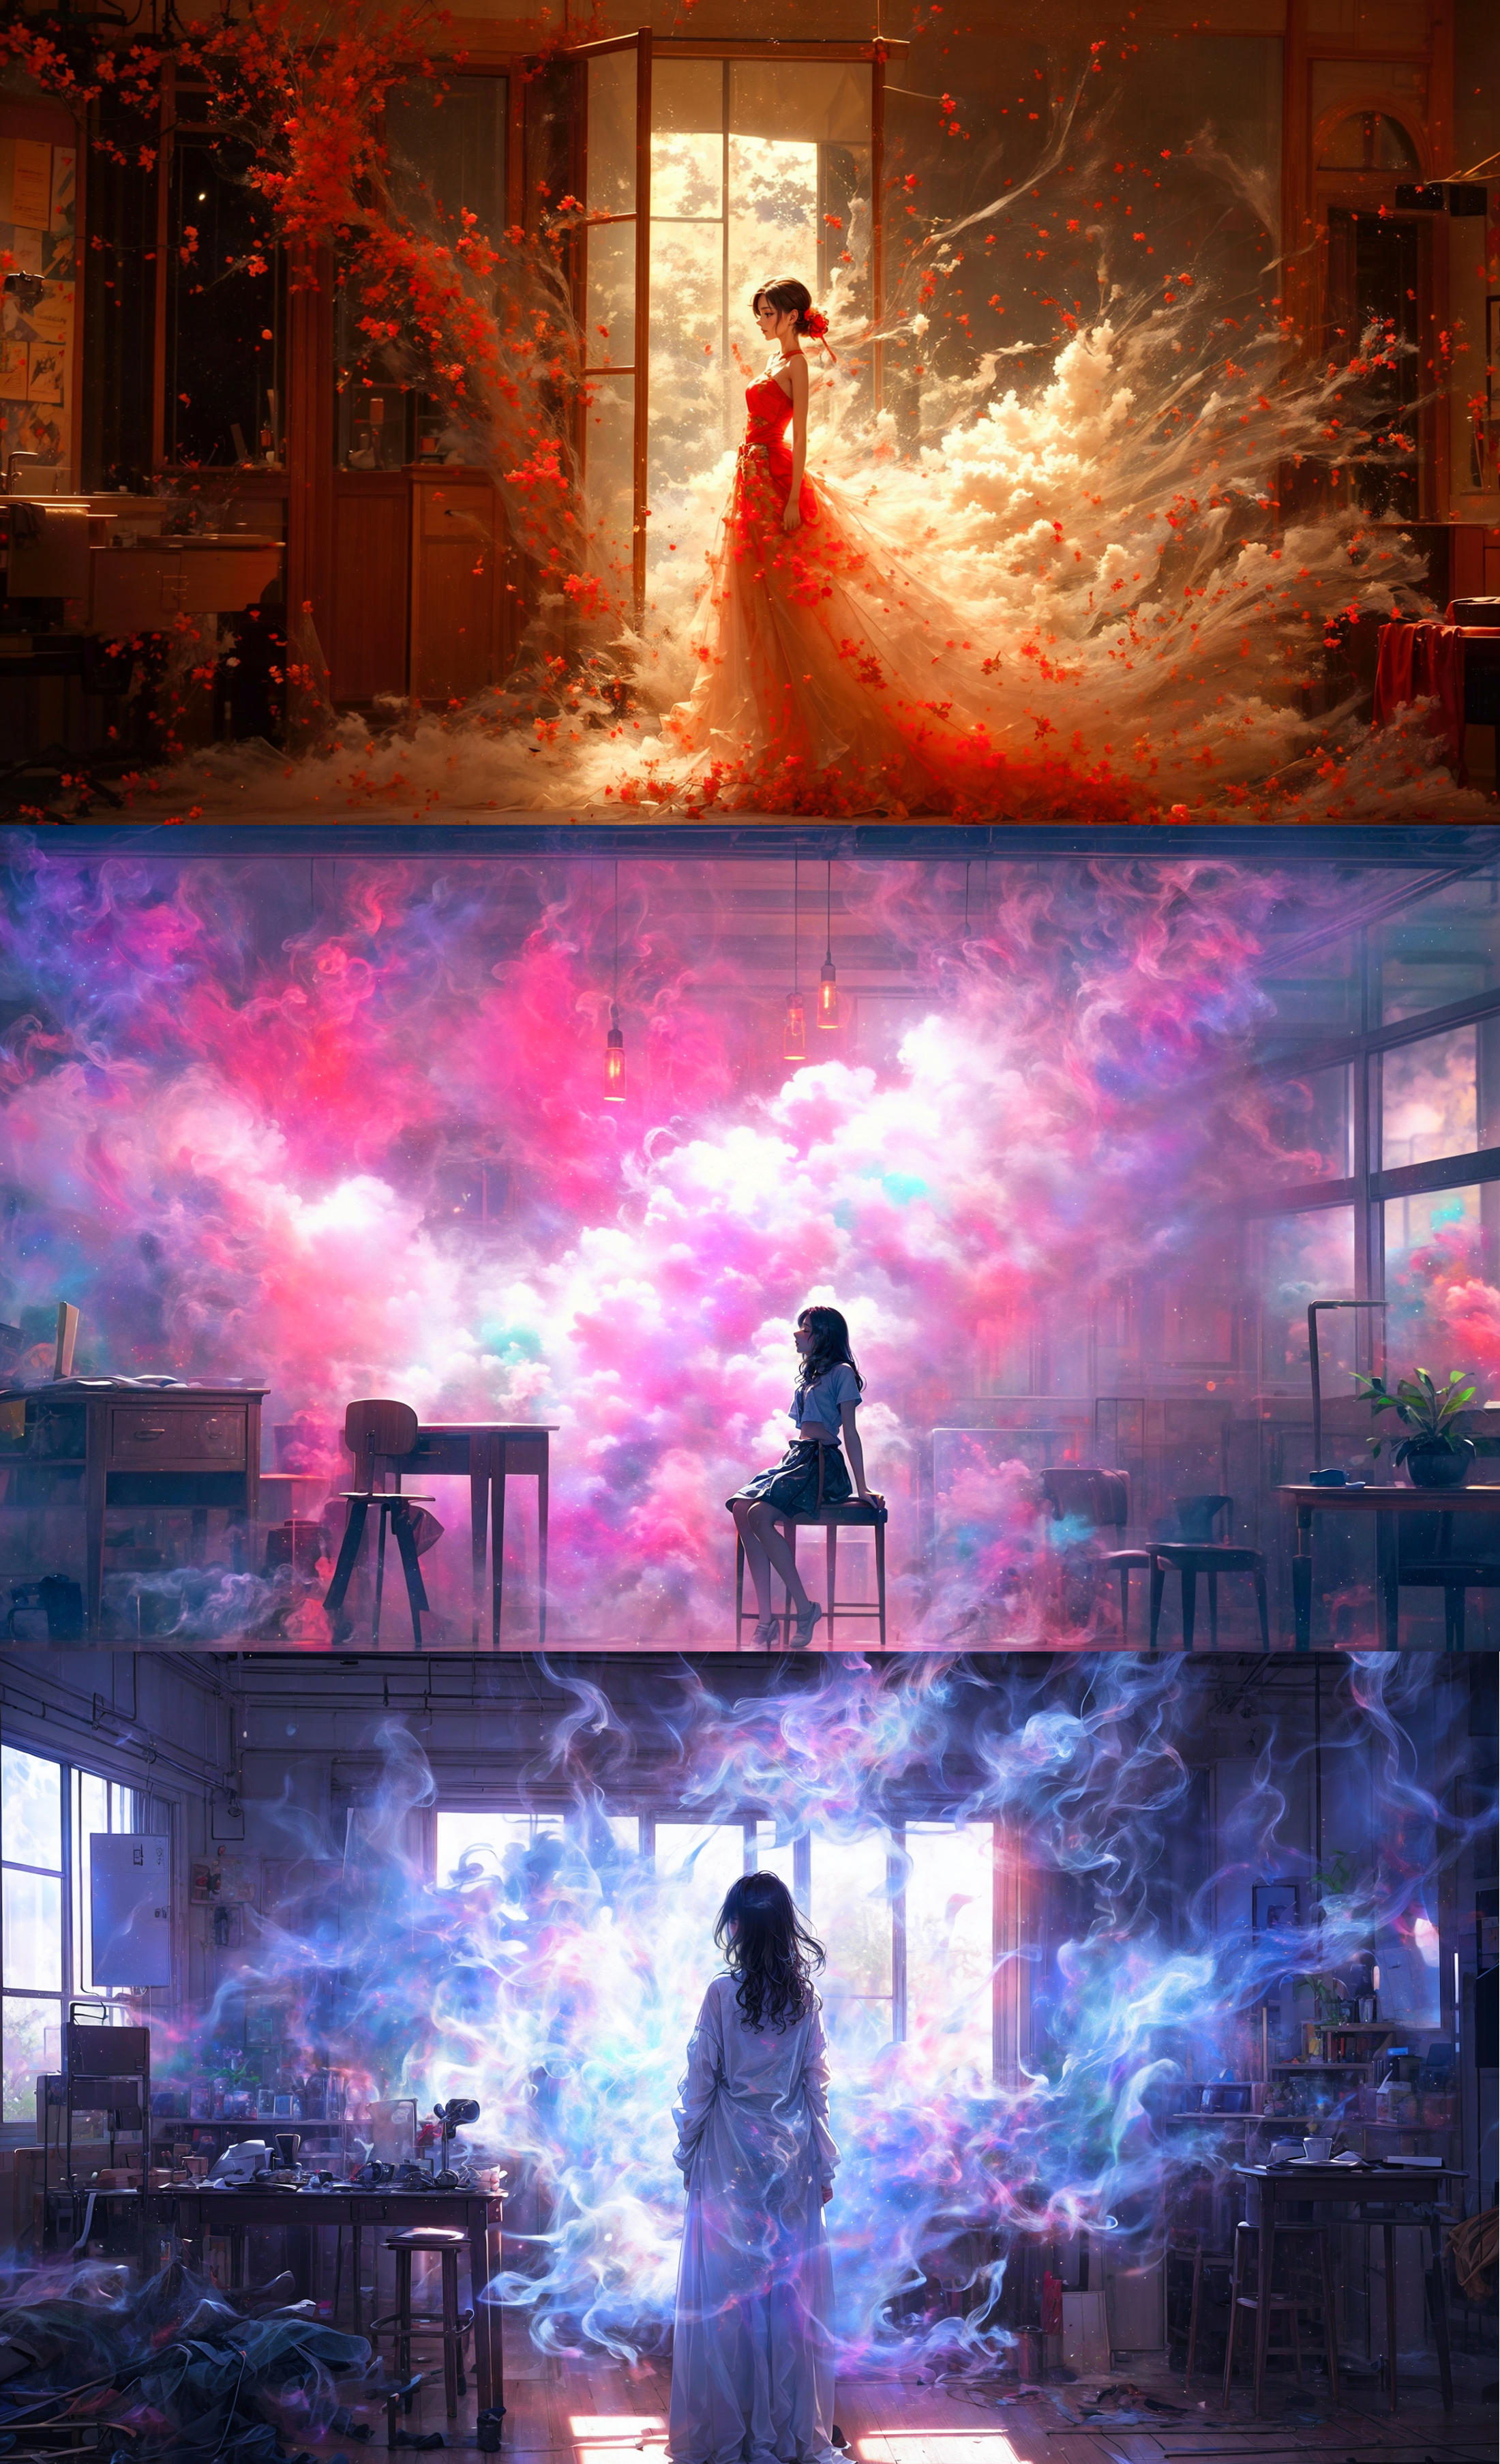 A collage of artistic images featuring a girl in a dress and smoke, with various colored backgrounds and a room with chairs and a dining table.